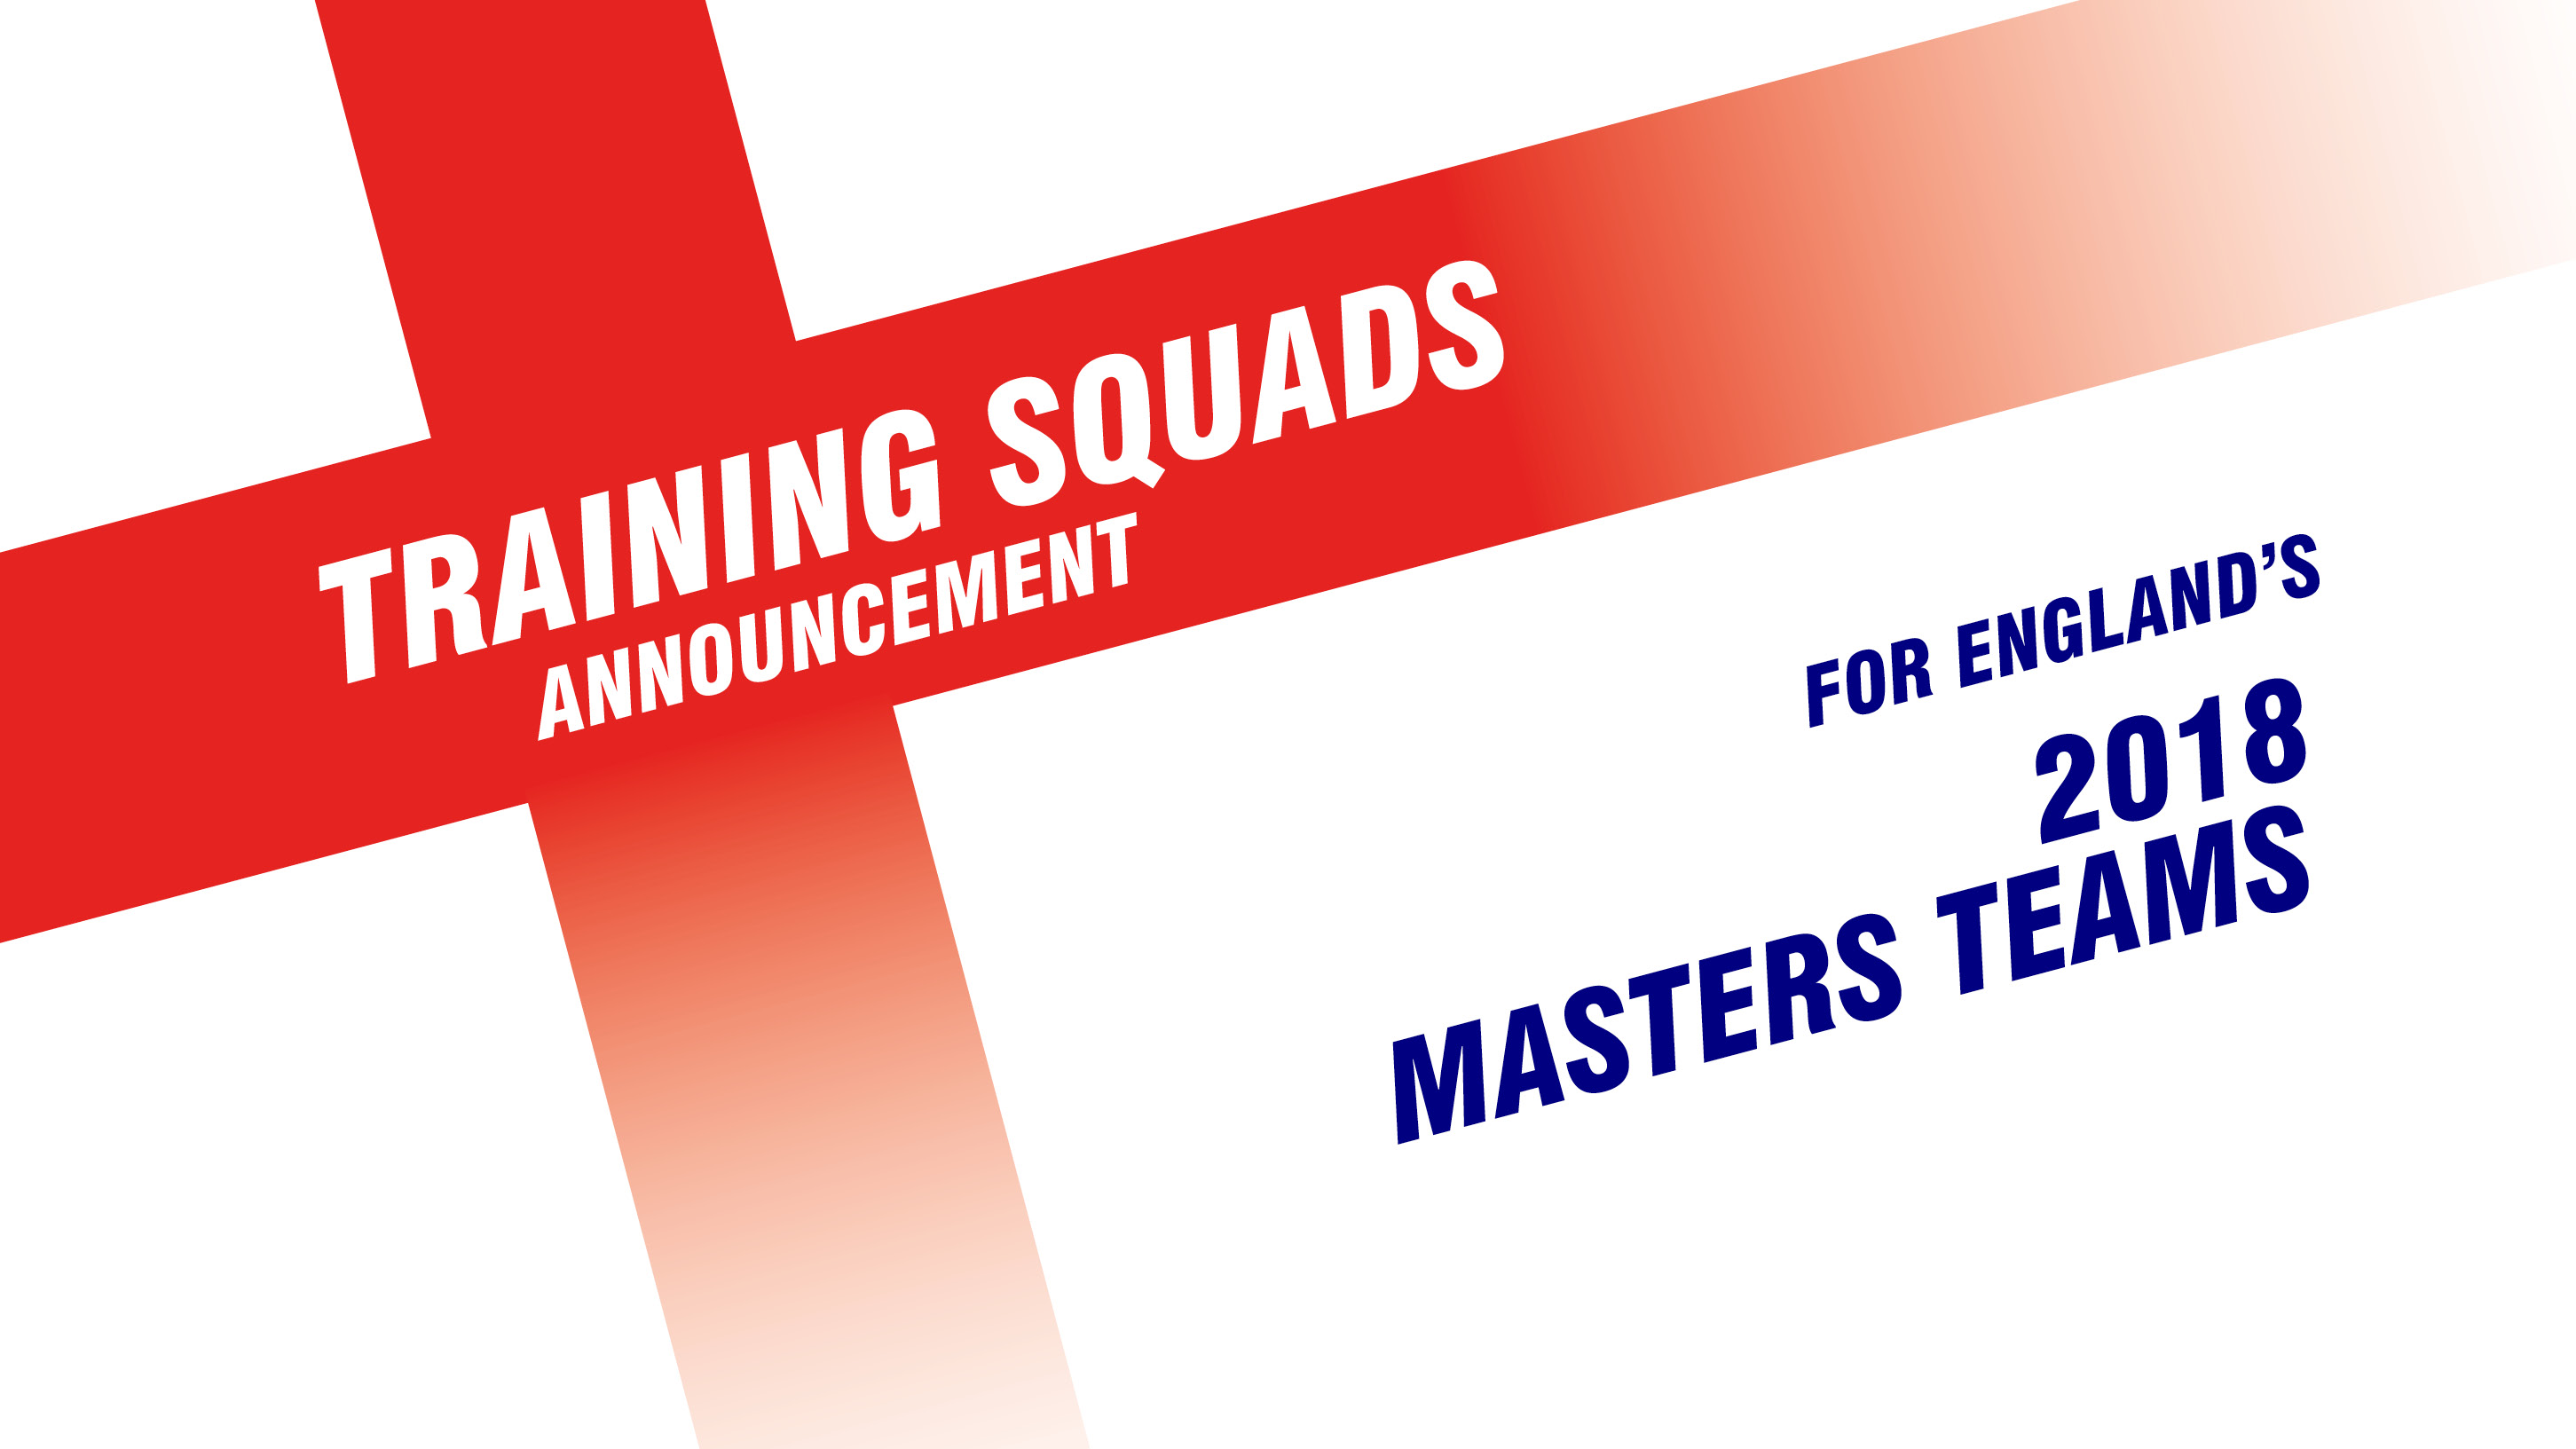 Masters High Performance Training Squads announced